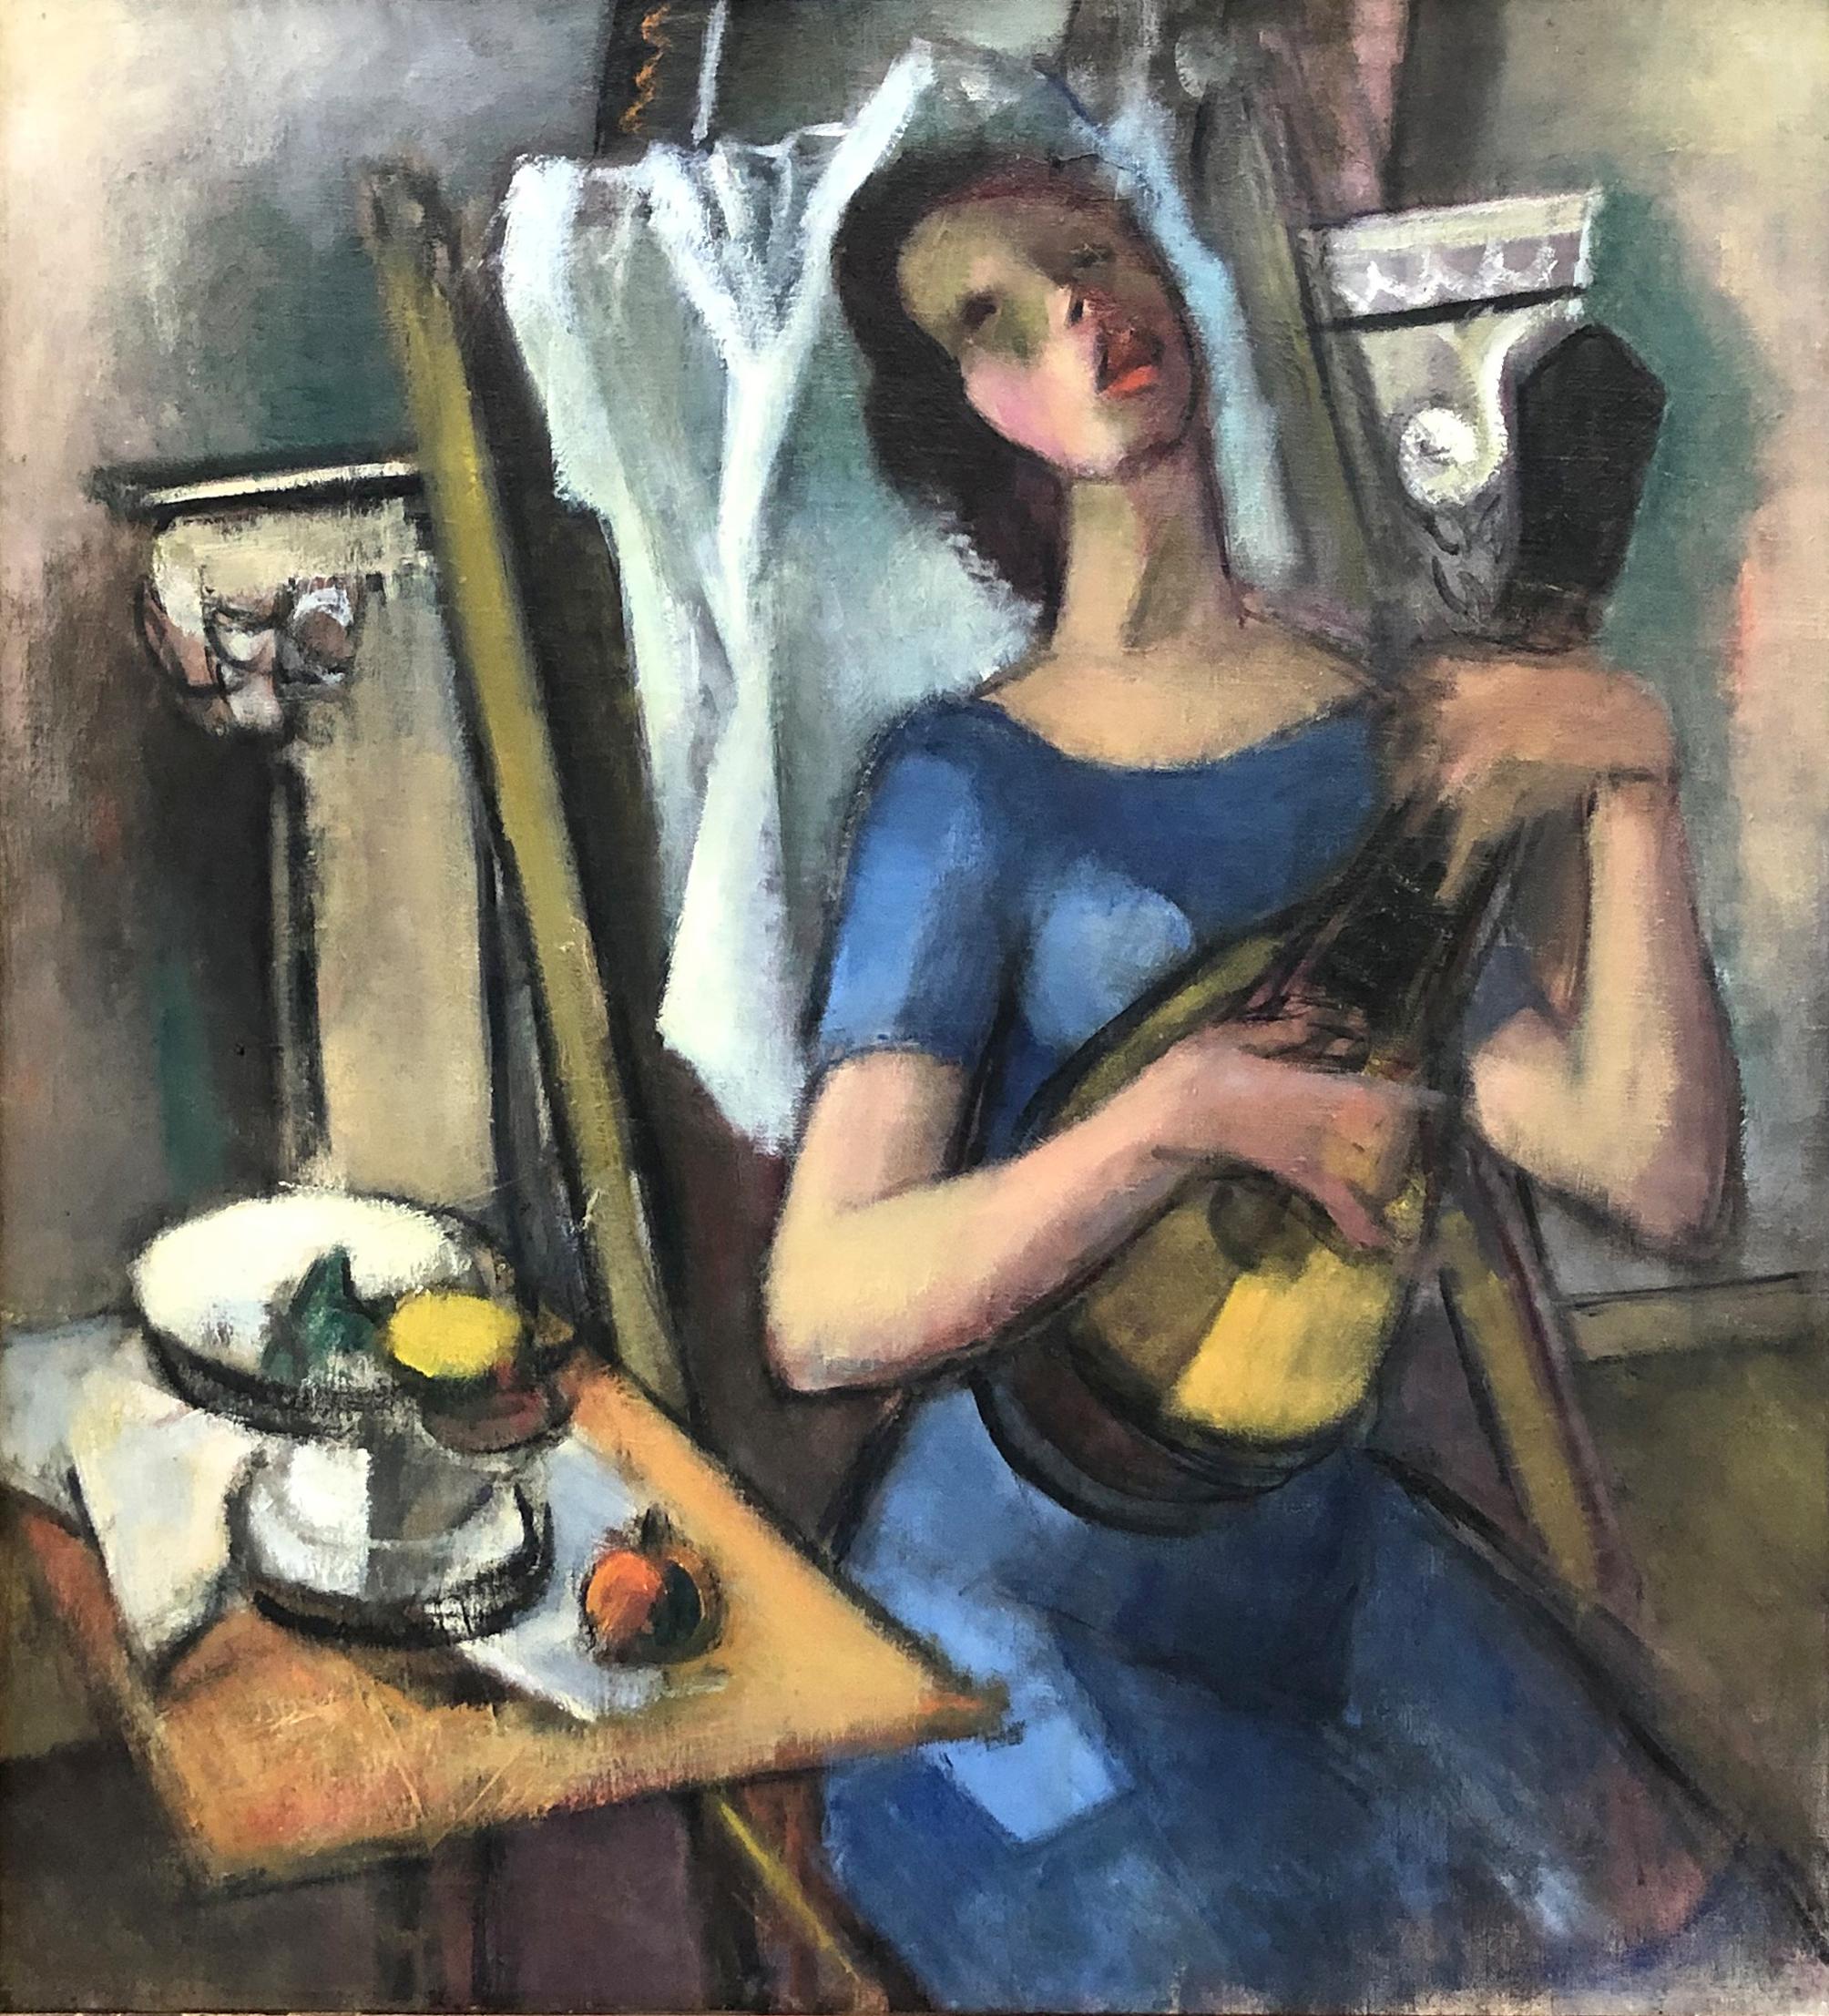 Woman with a Guitar, Cubism - Painting by Simka Simkhovitch